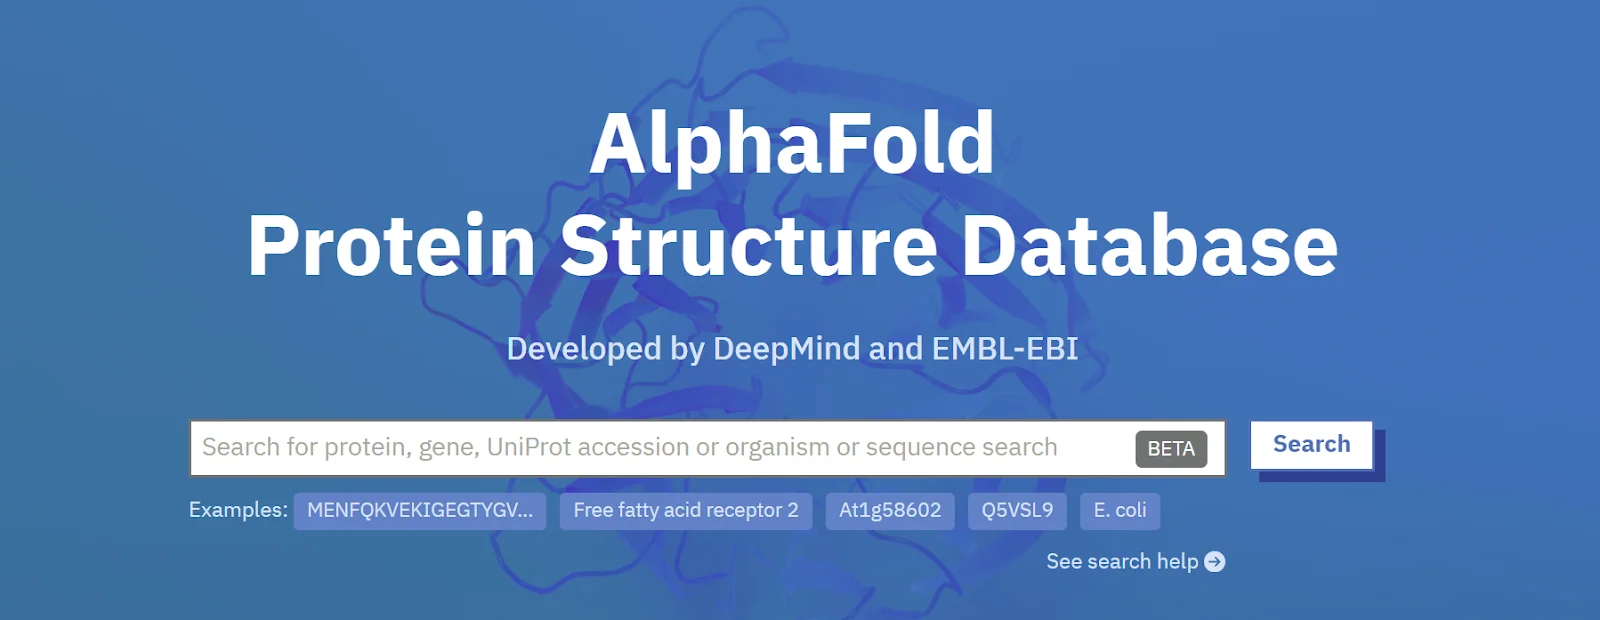 Homepage of the AlphaFold Protein Structure Database with a search interface for proteins and genes.